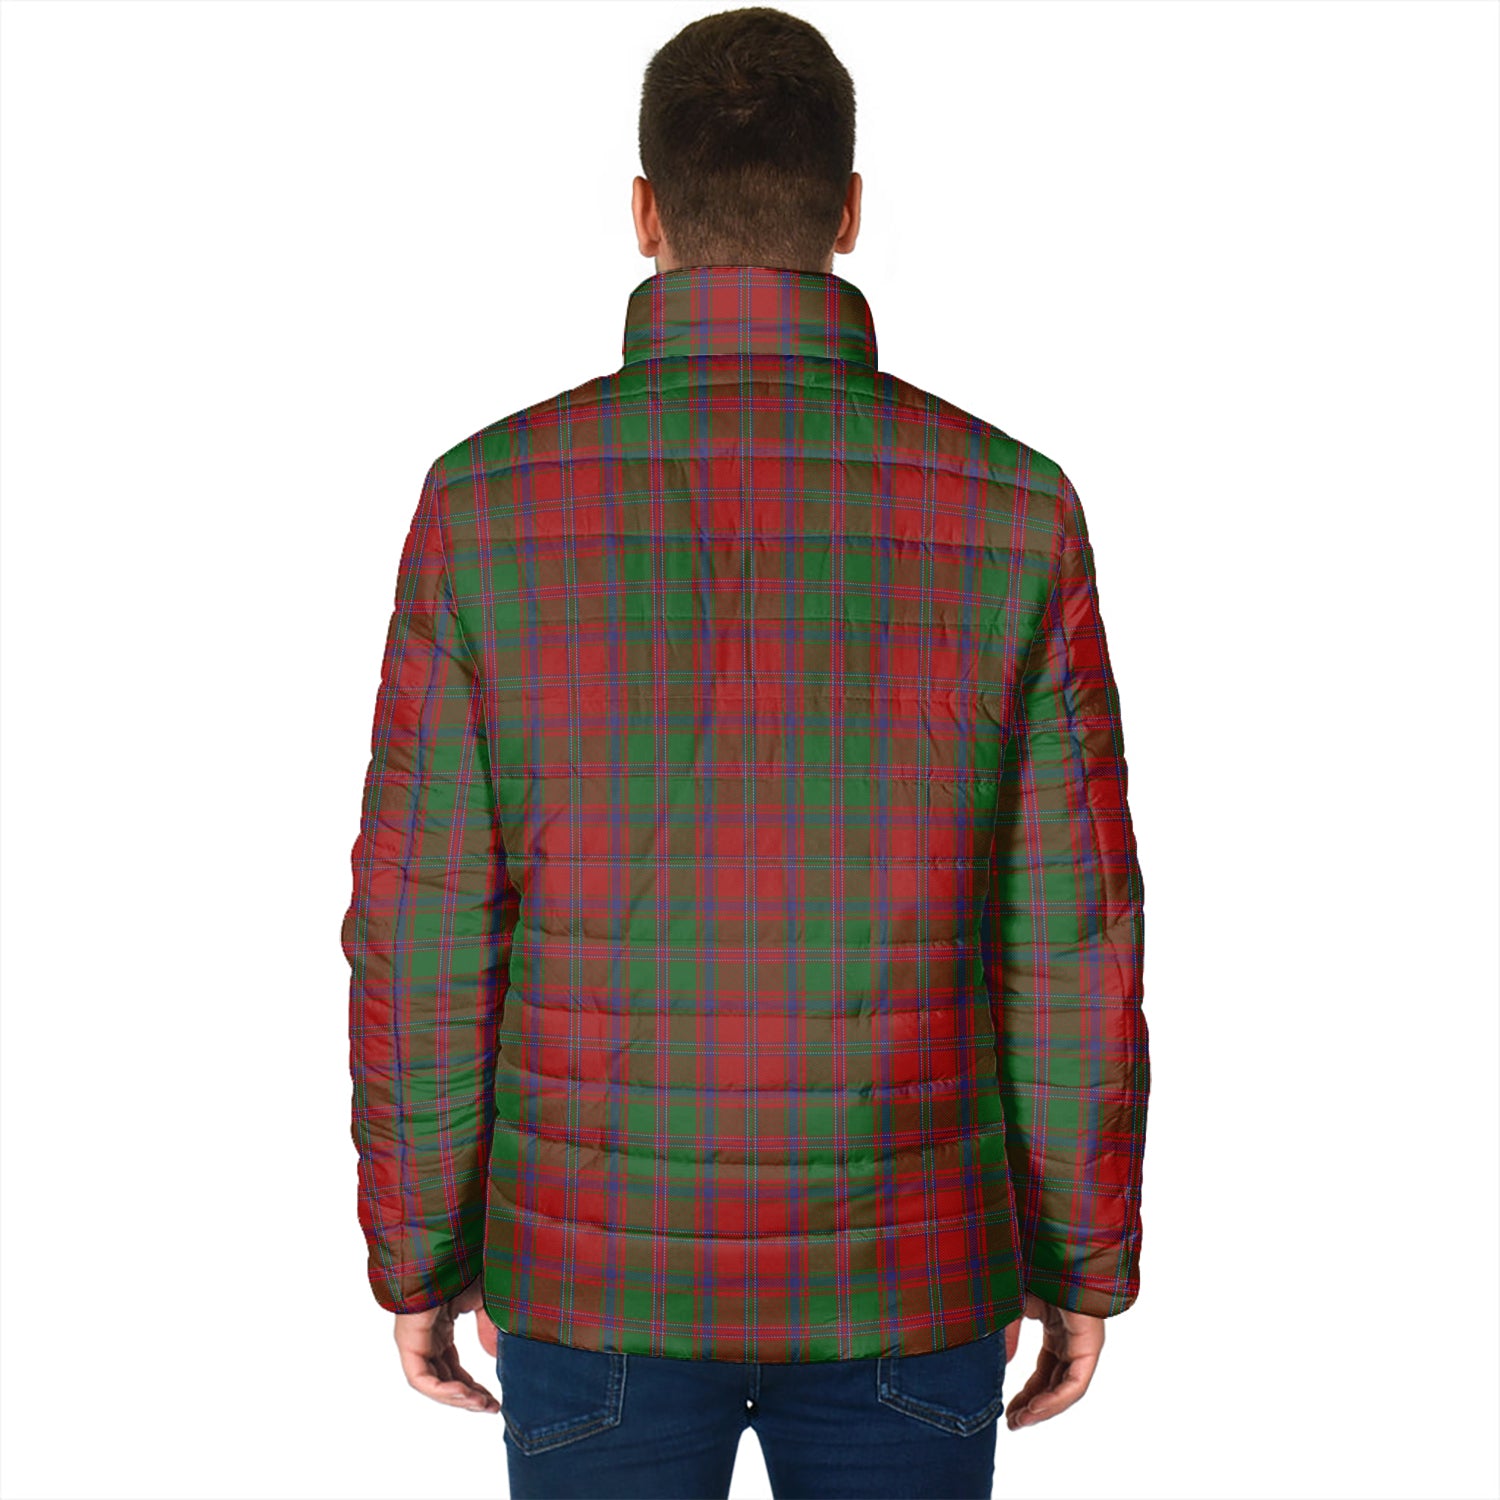 stewart-of-appin-tartan-padded-jacket-with-family-crest